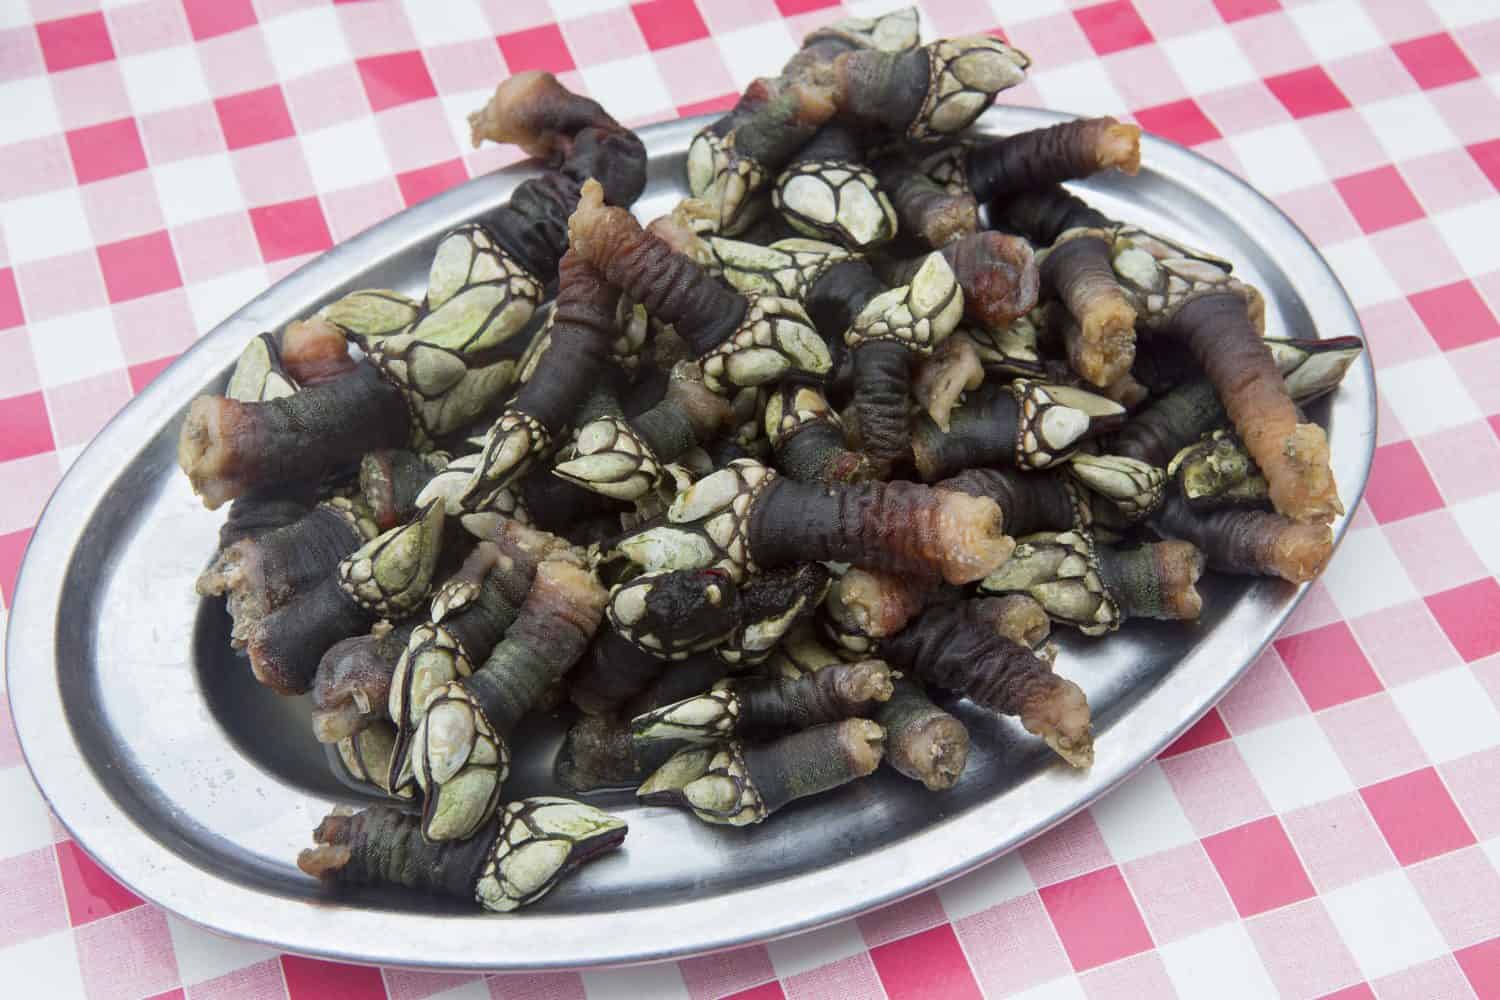 Gooseneck barnacles, a traditional Spanish delicacy